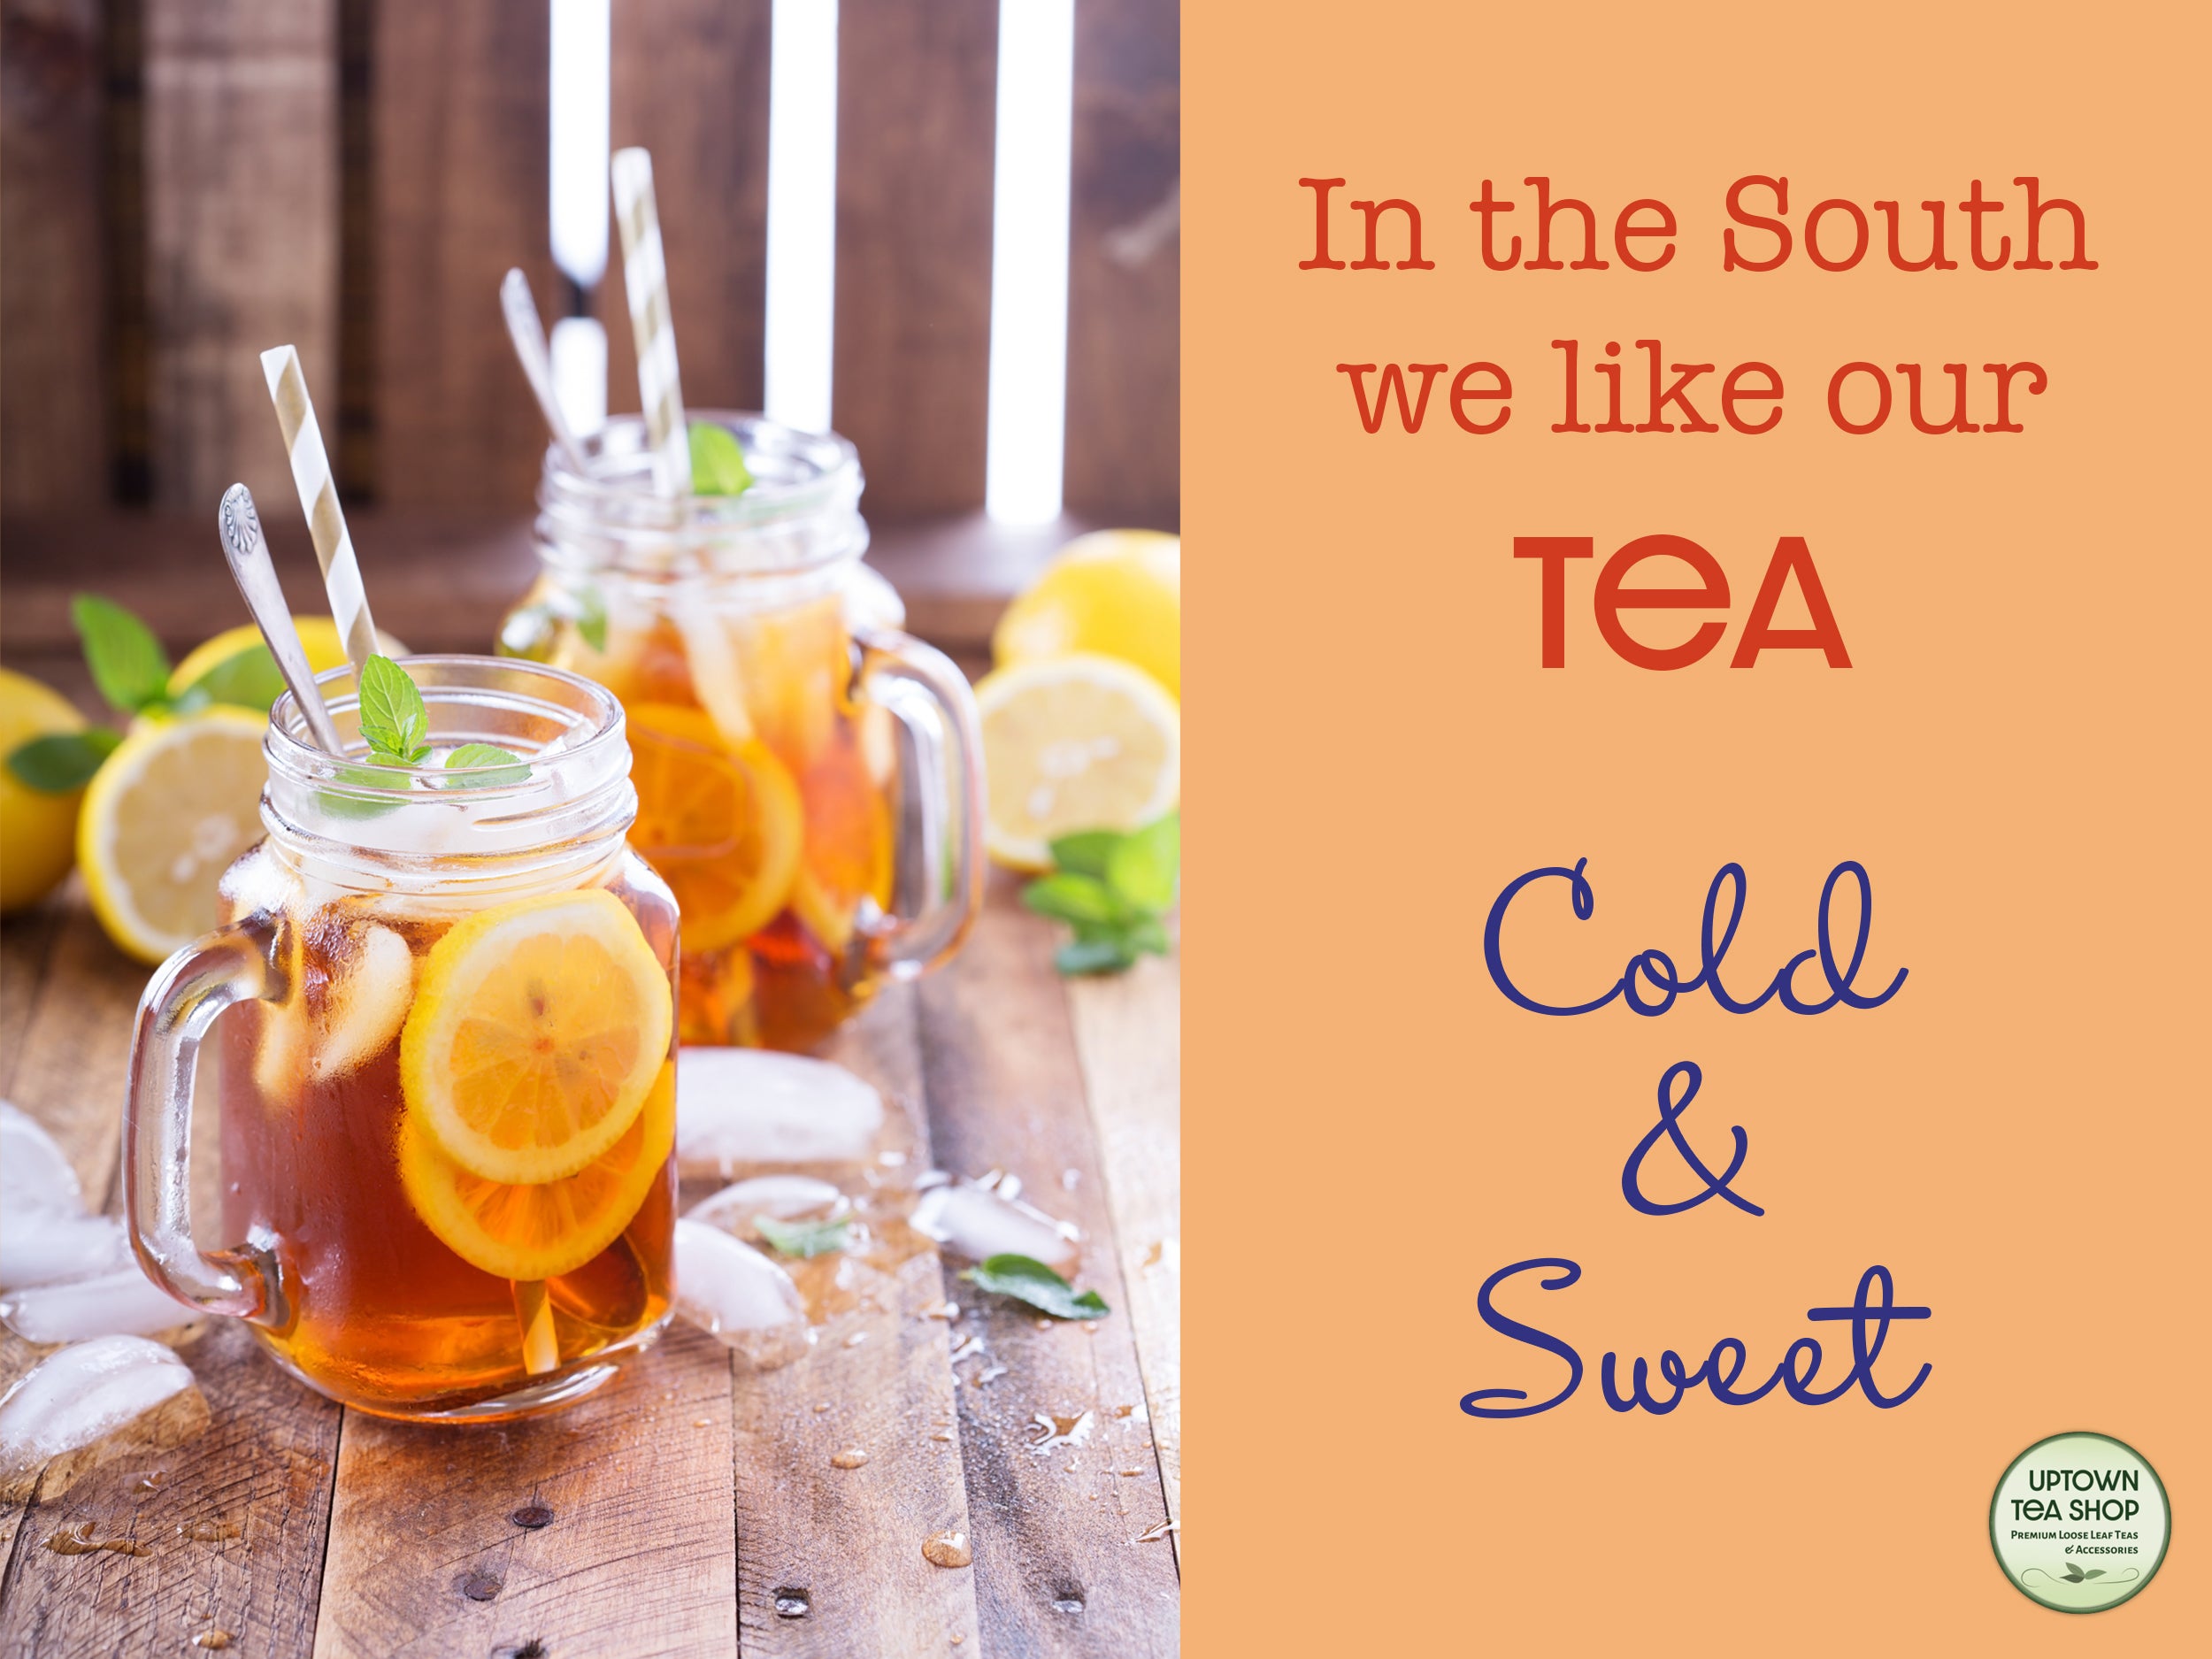 In the South we like our Tea Cold and Sweet